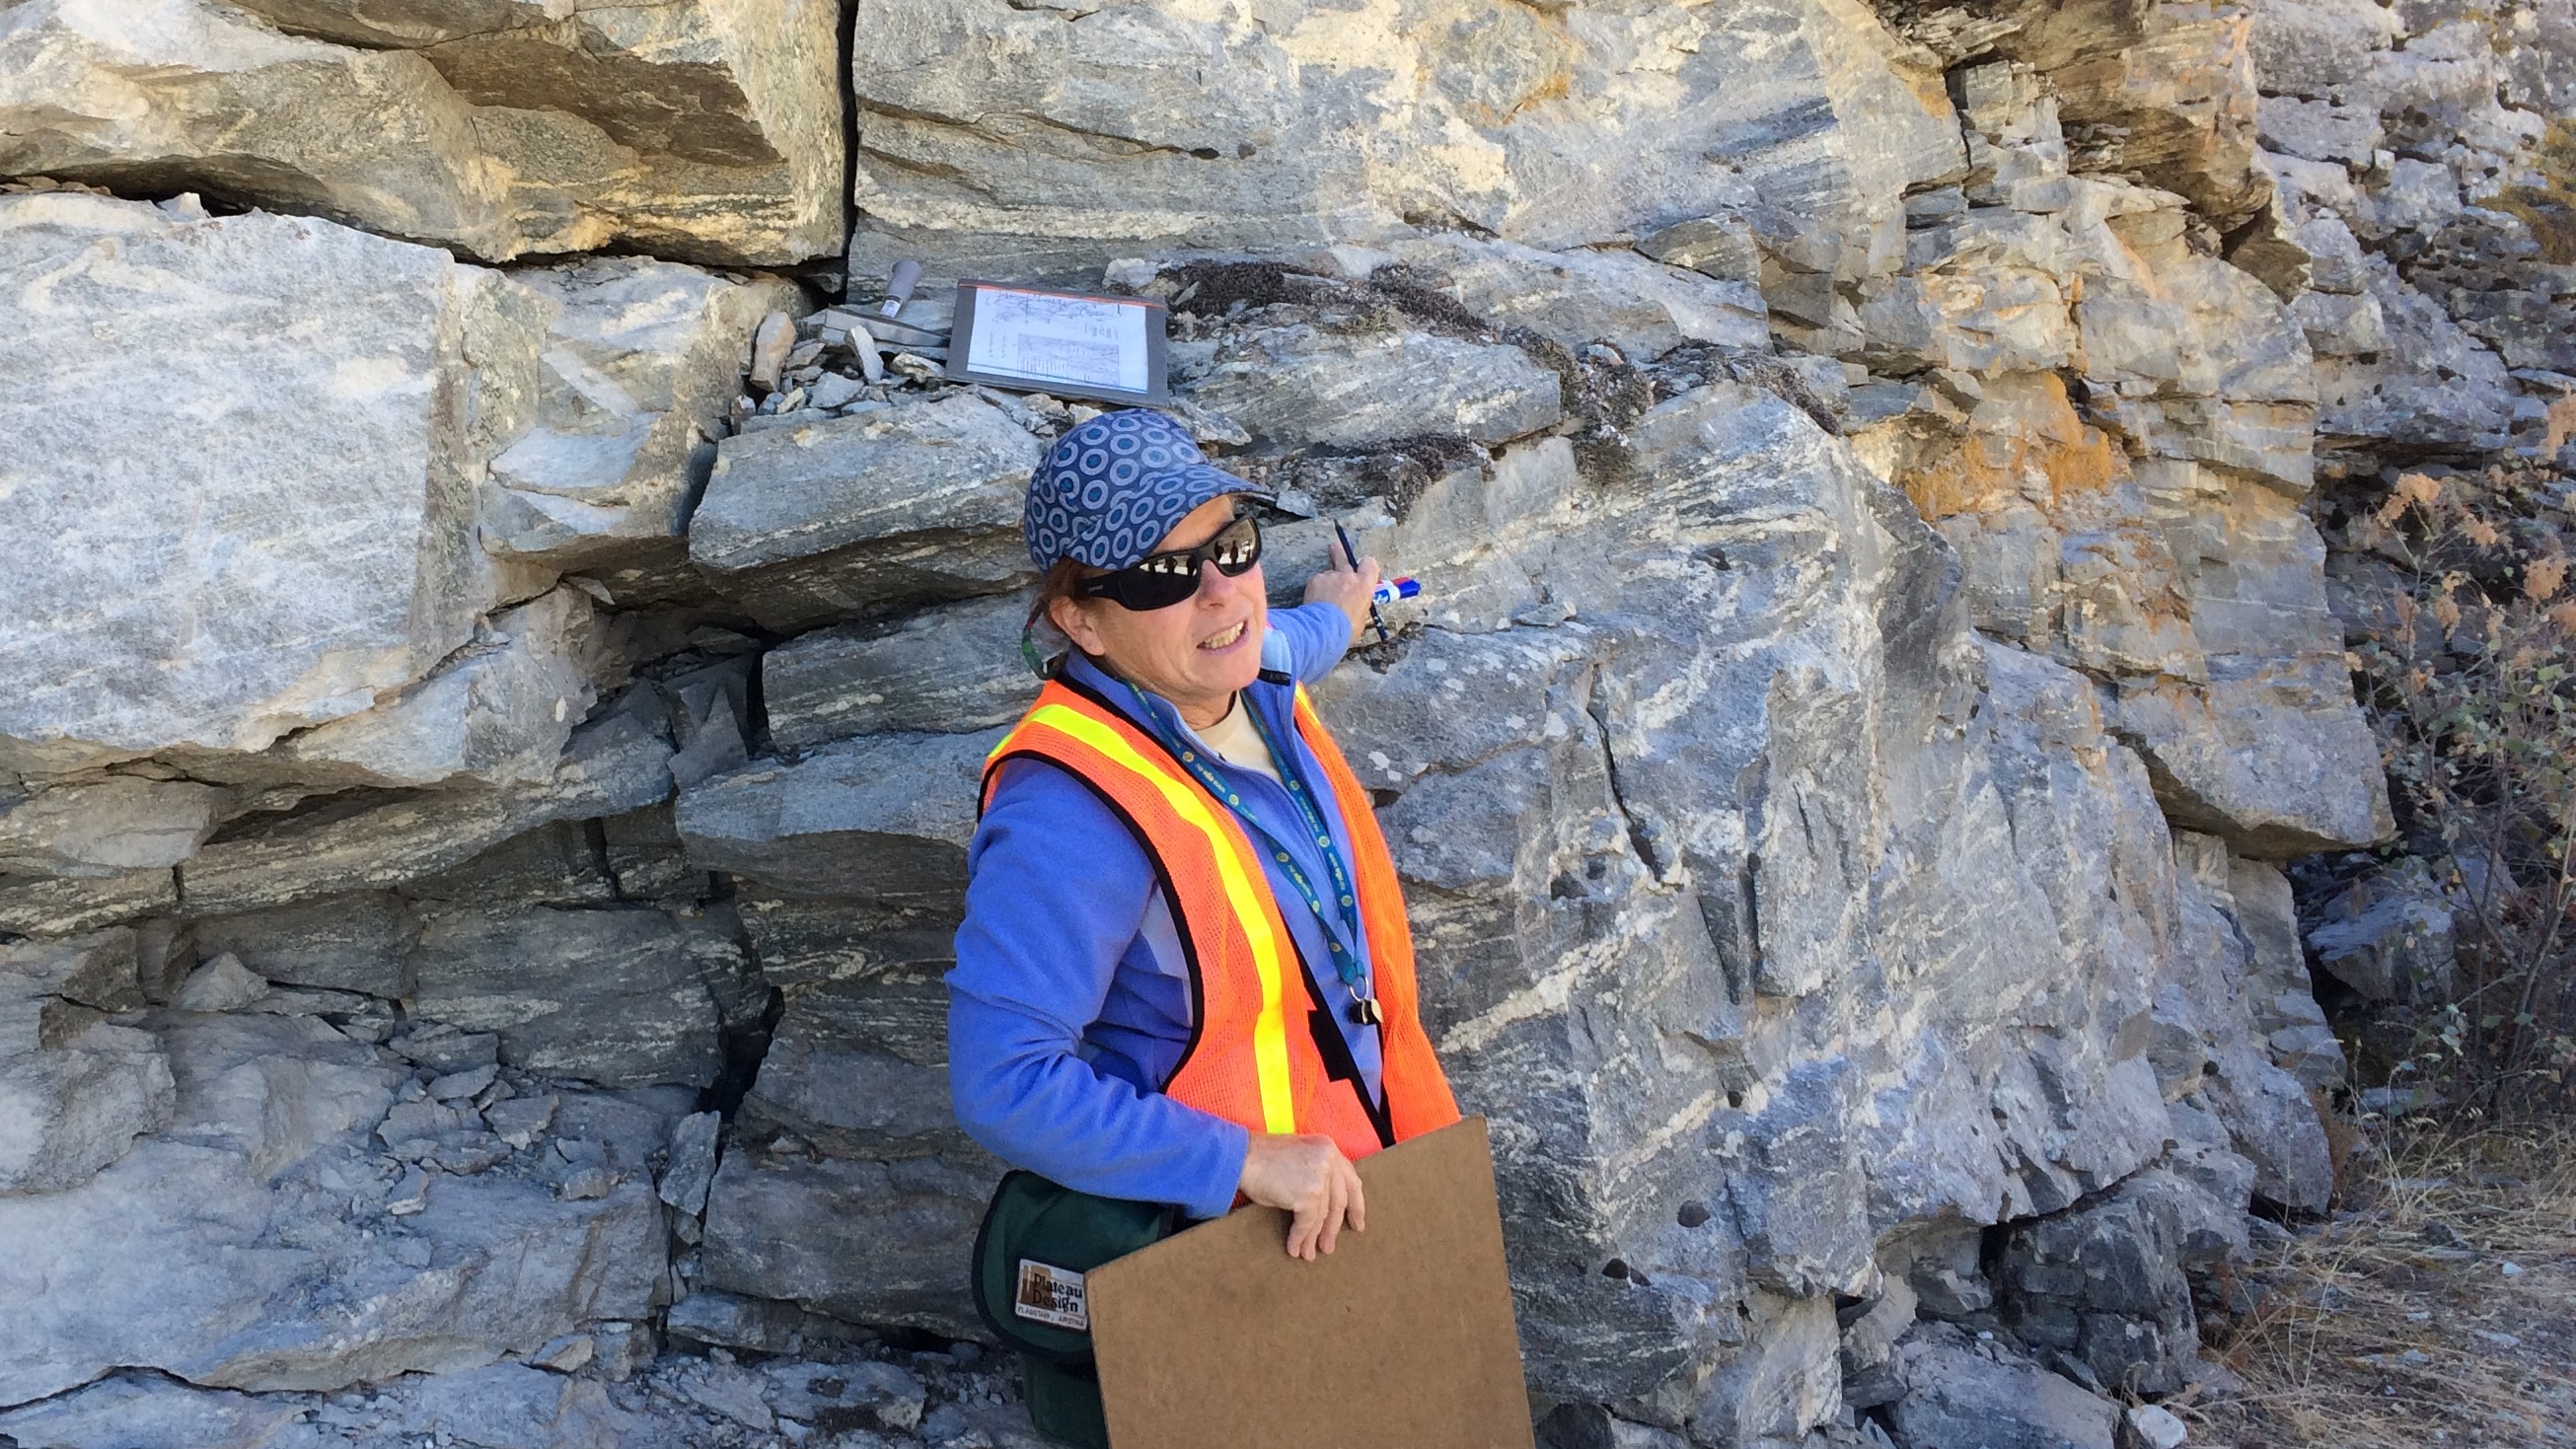 Professor Liz Schermer lectures in front of a rock formation for Geology 318, Structural Geology